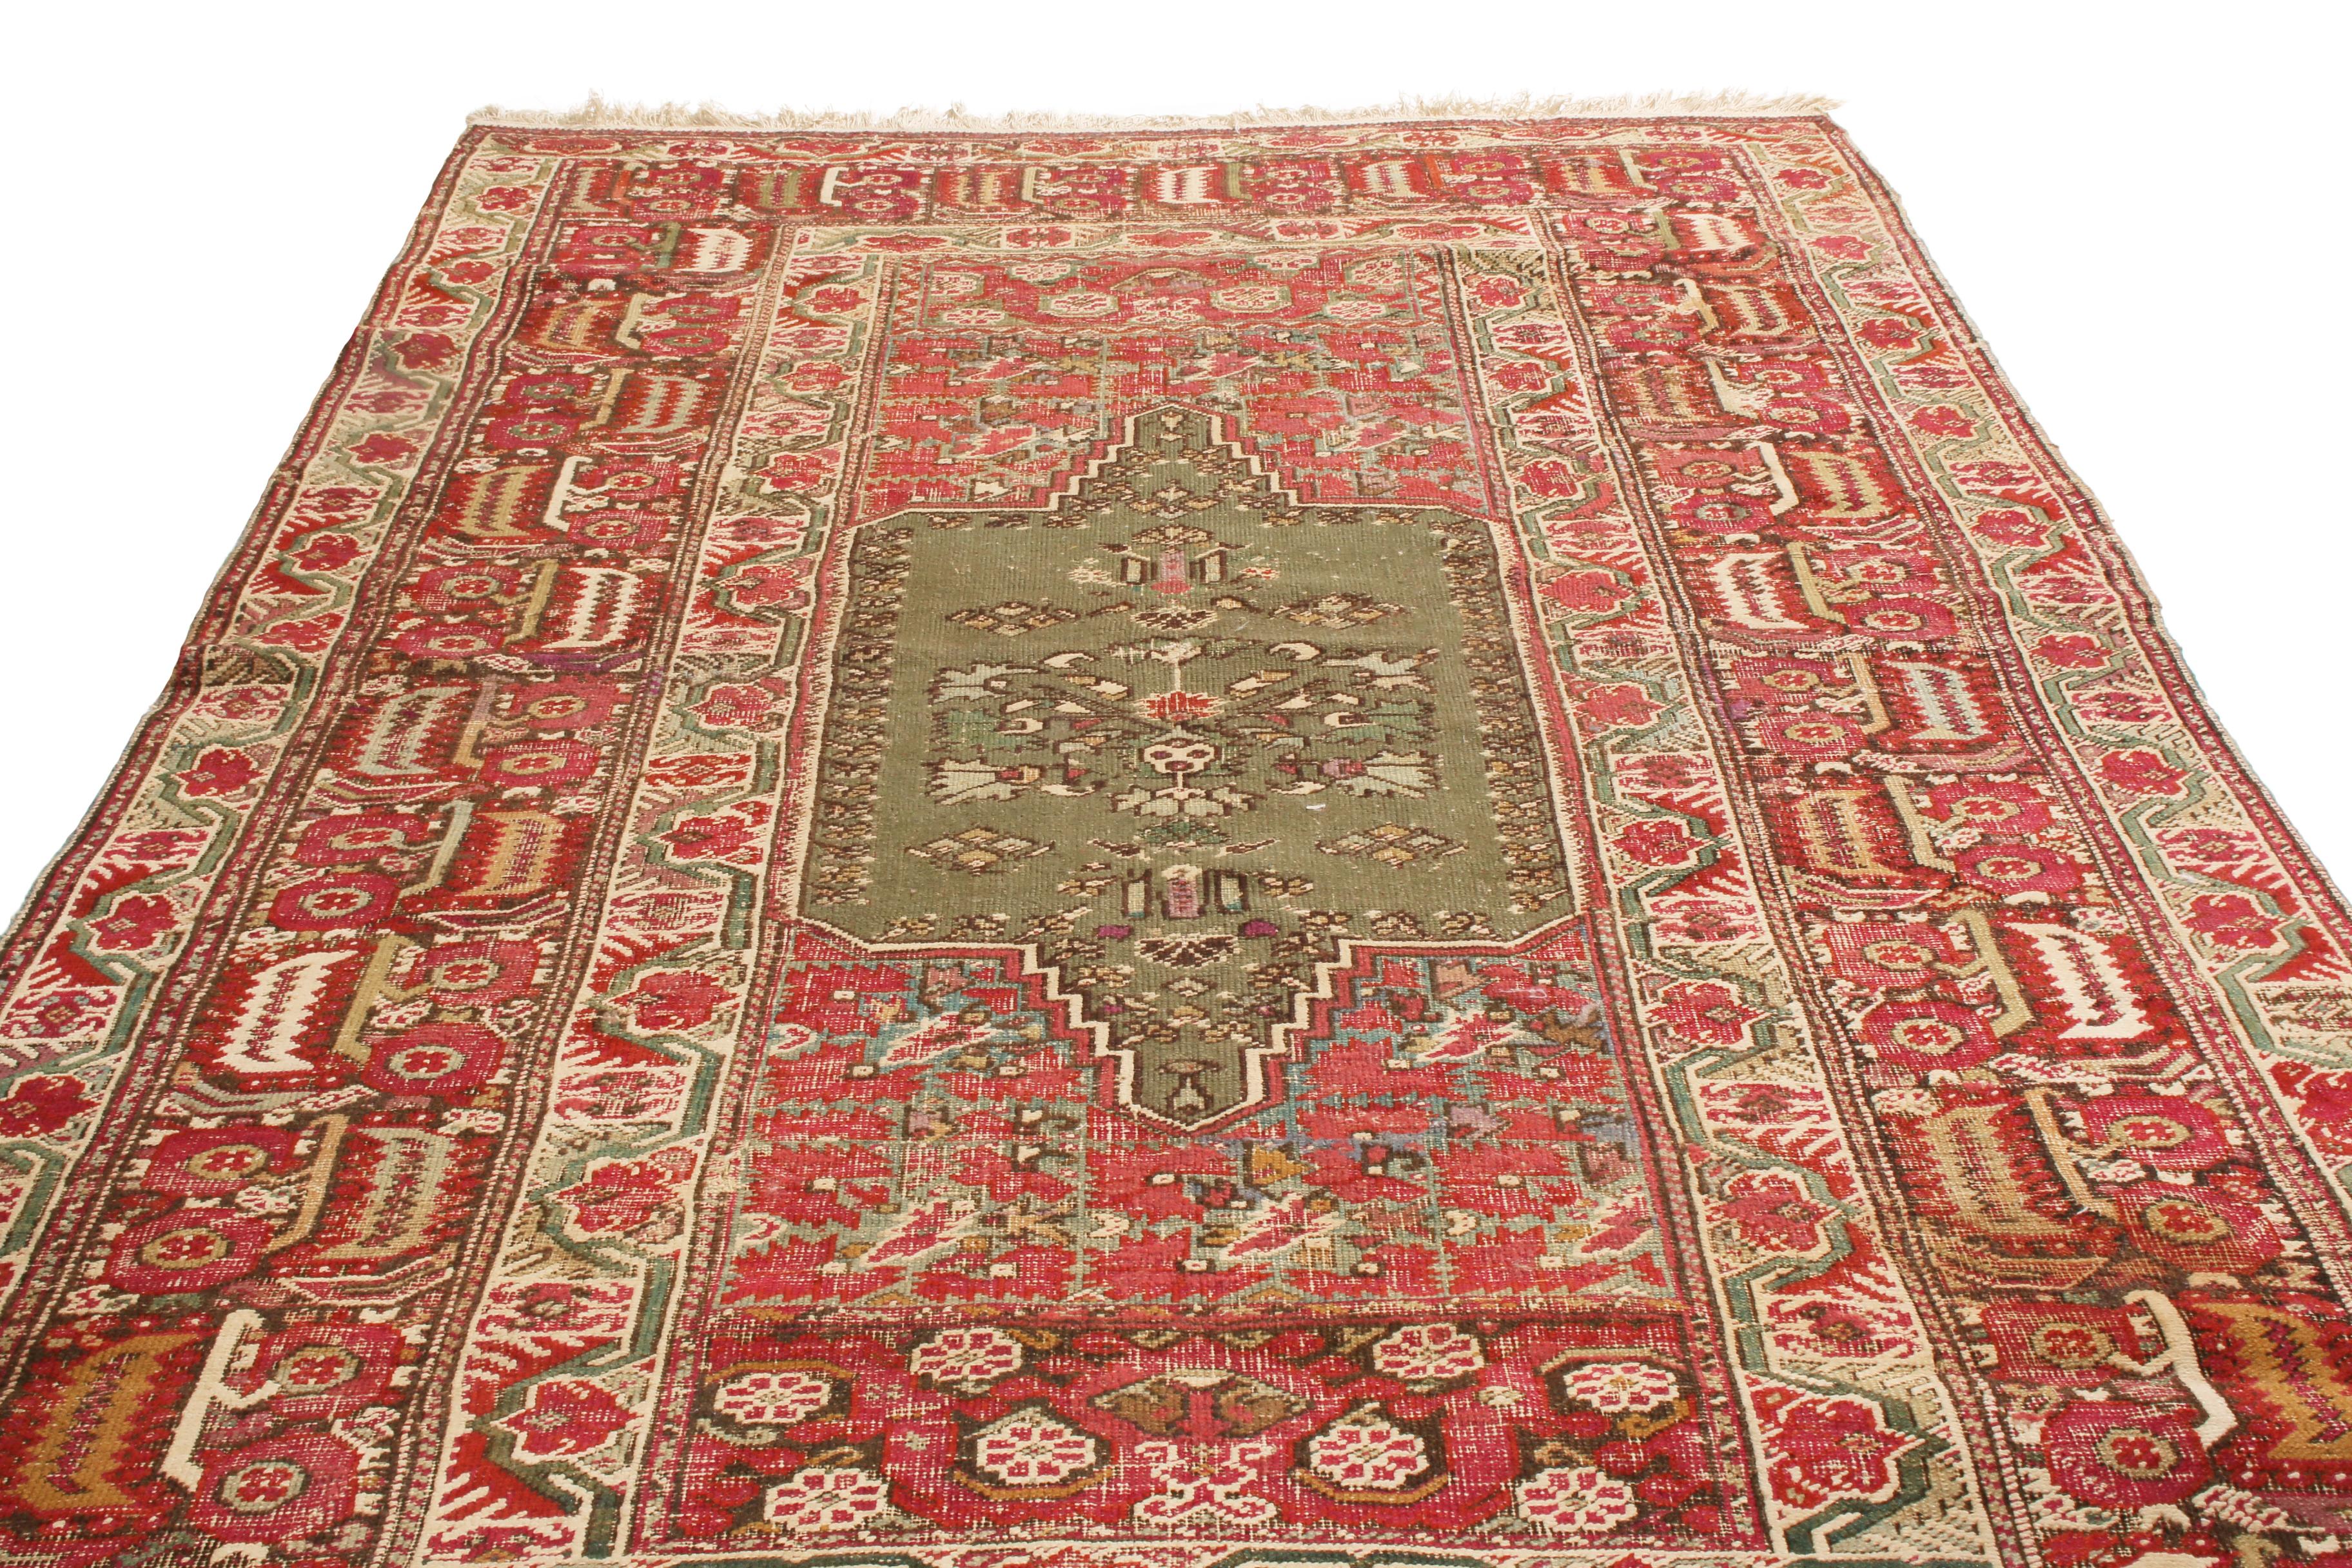 Originating from Turkey in 1890, this antique traditional Gordes wool rug features a medallion style field design and a particular finesse among its kind. Hand knotted in durable wool pile, the central sage green floral medallion resembles antique